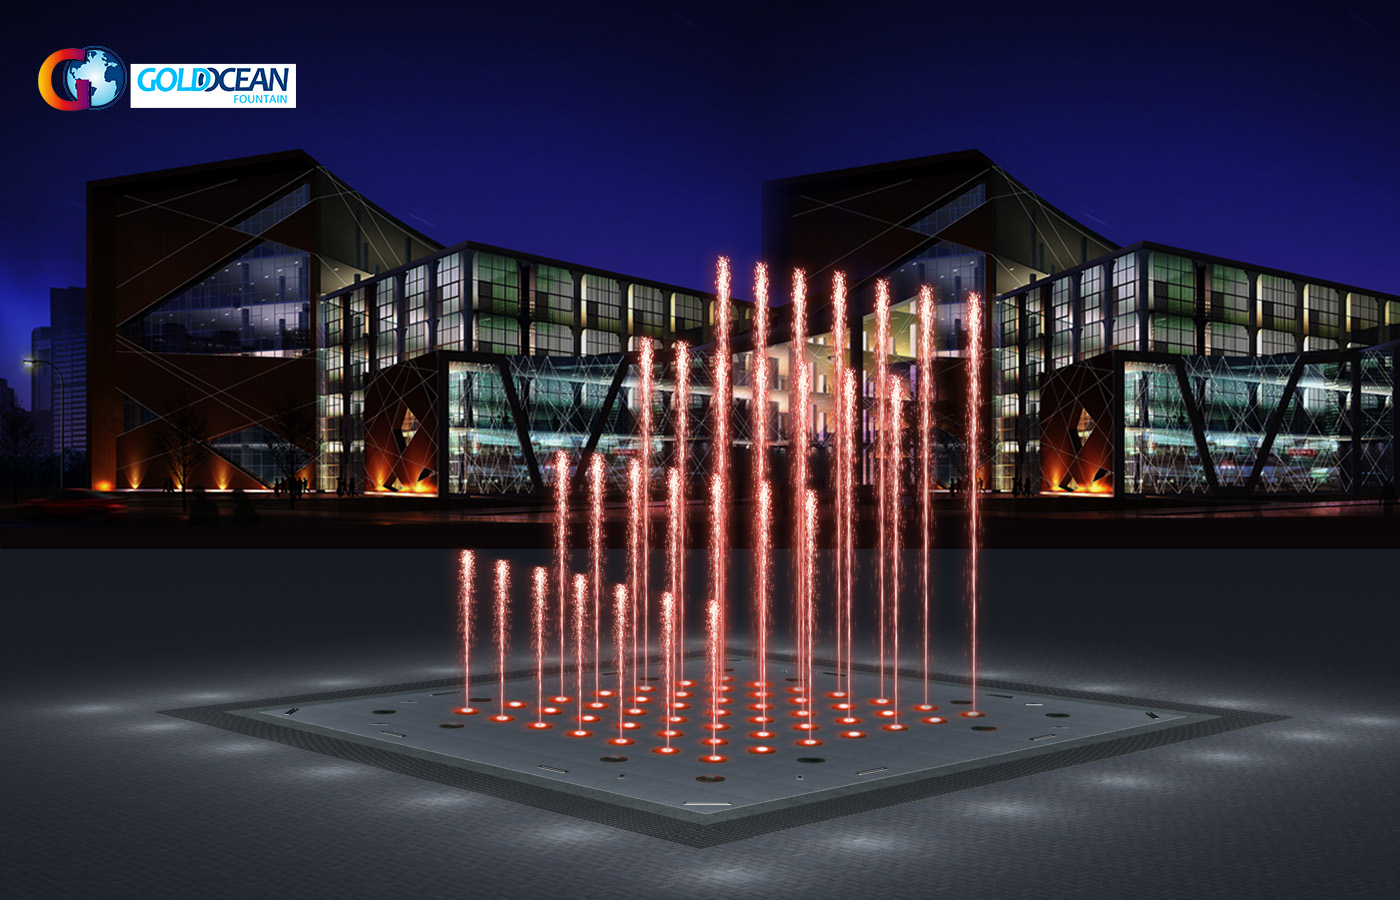 Outdoor Music Dancing Dry Fountain with Jumping Jet Fountain